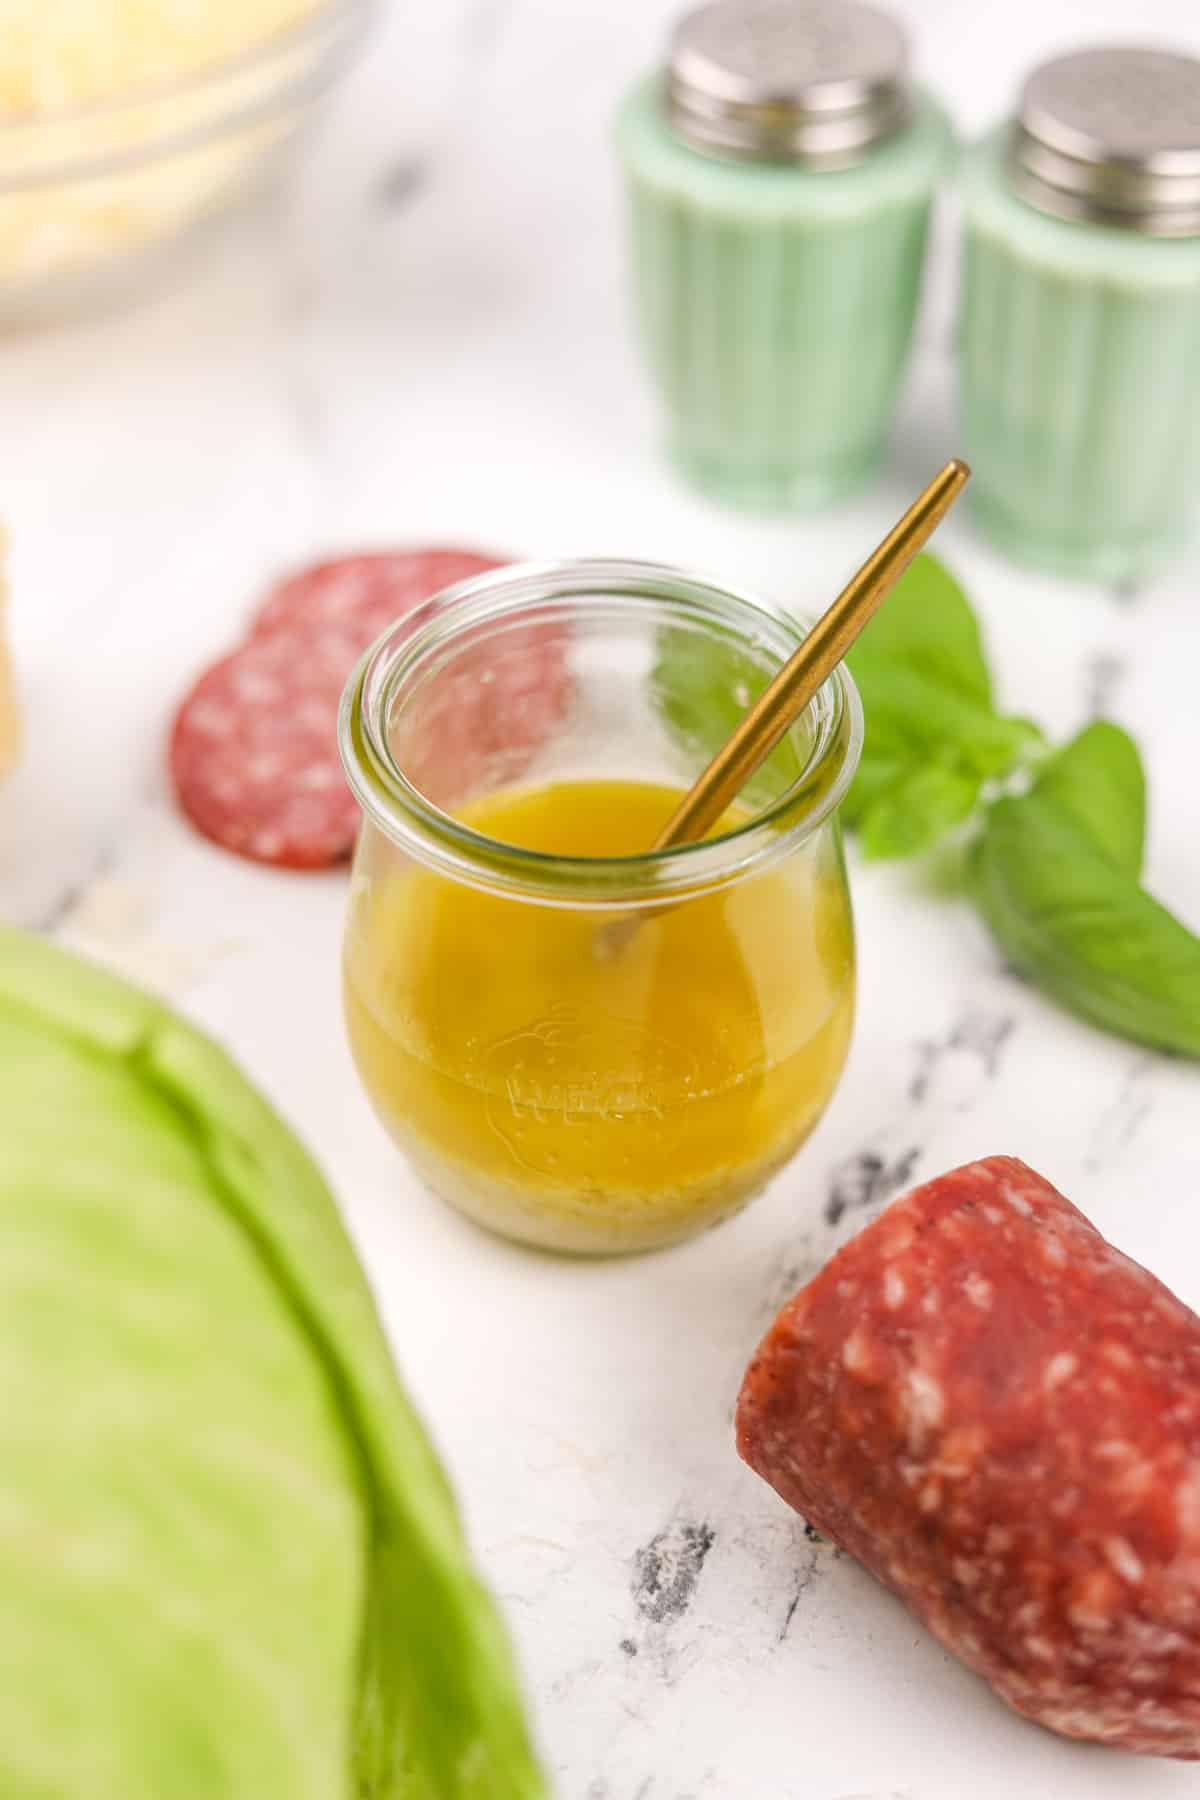 A small glass jar filled with a bright vinaigrette dressing.